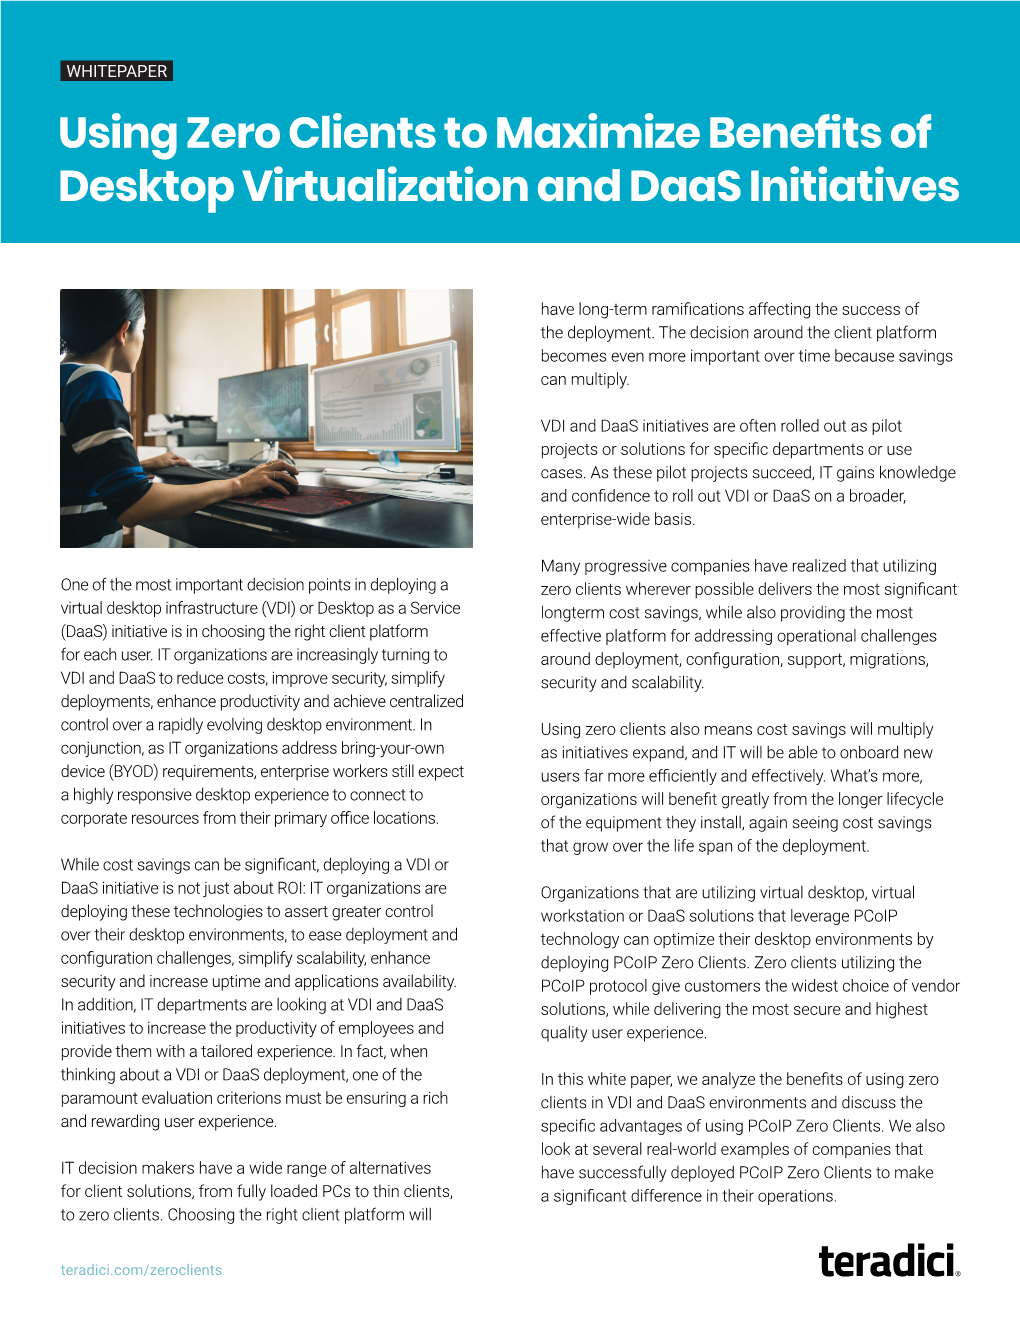 Using Zero Clients to Maximize Benefits of Desktop Virtualization and Daas Initiatives